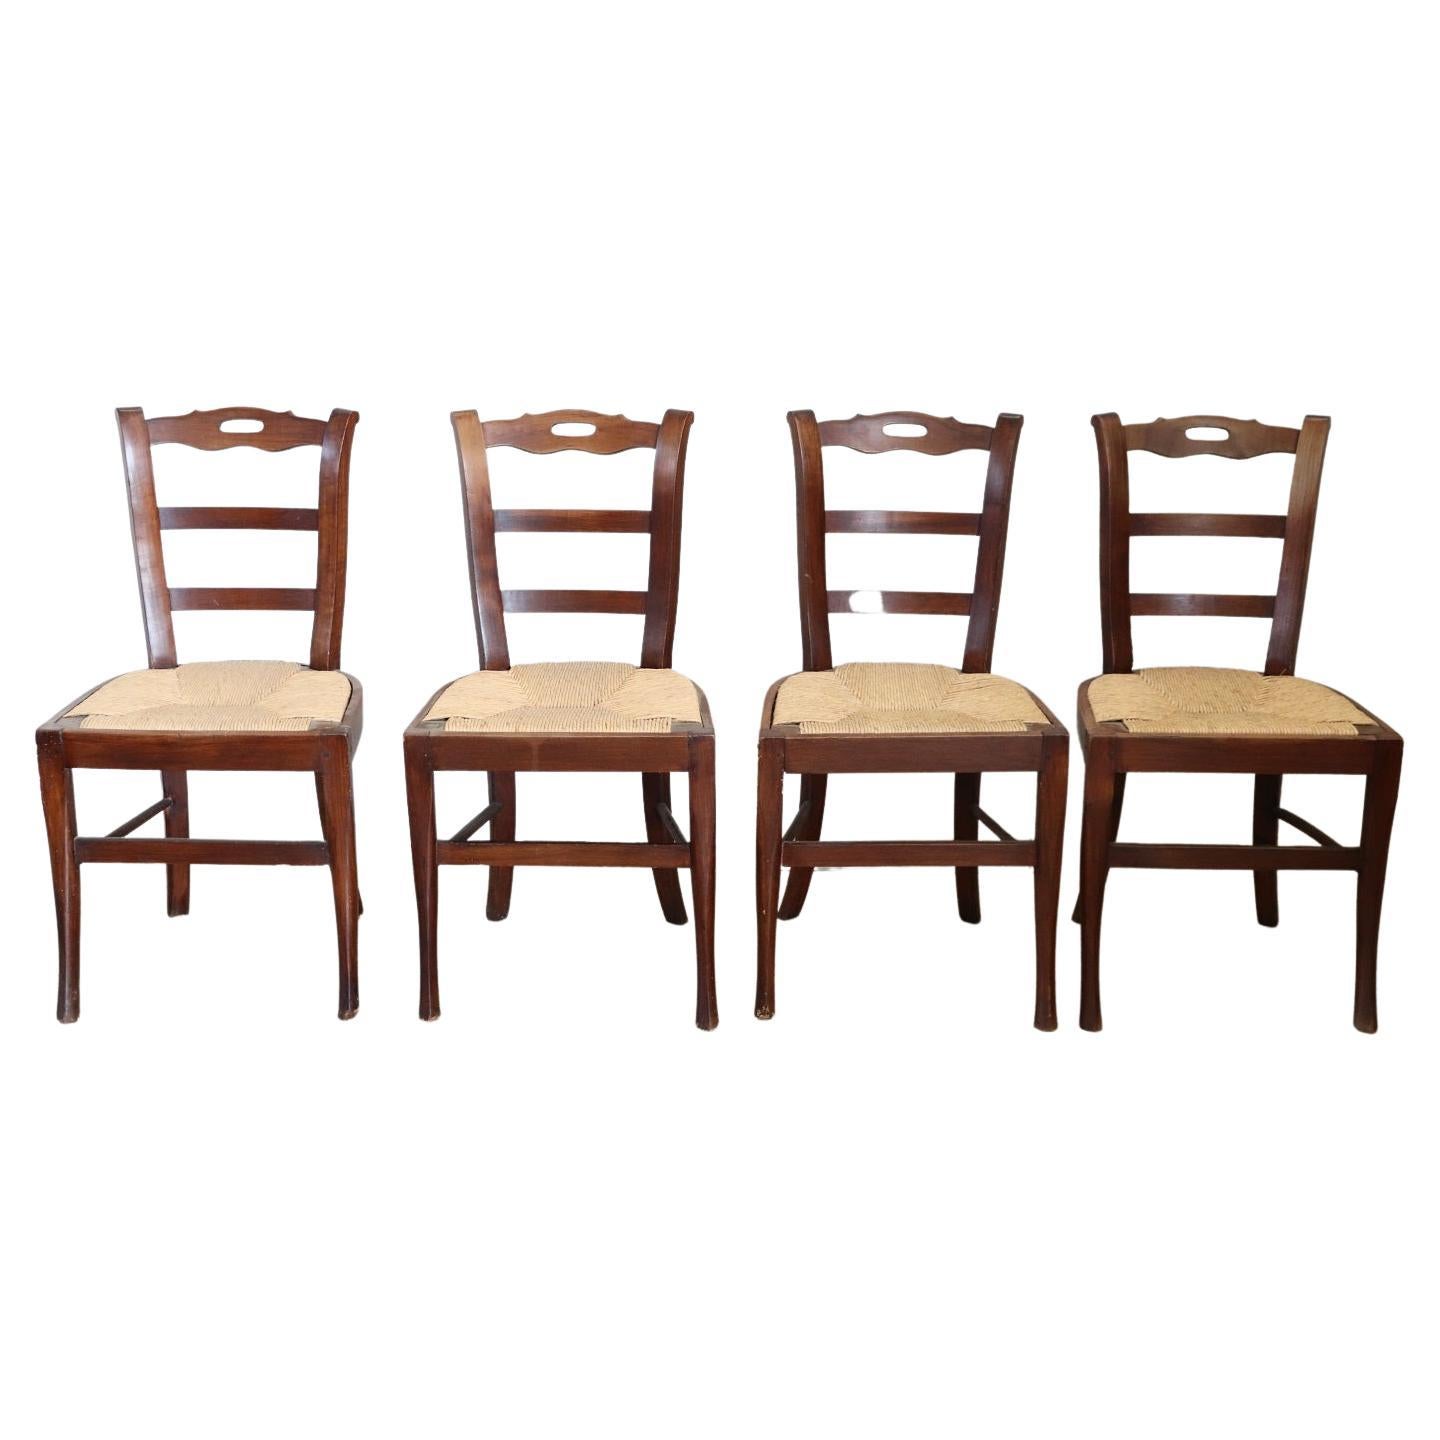 19th Century Set of Four Antique Chairs in Cherry Wood with Straw Seat For Sale